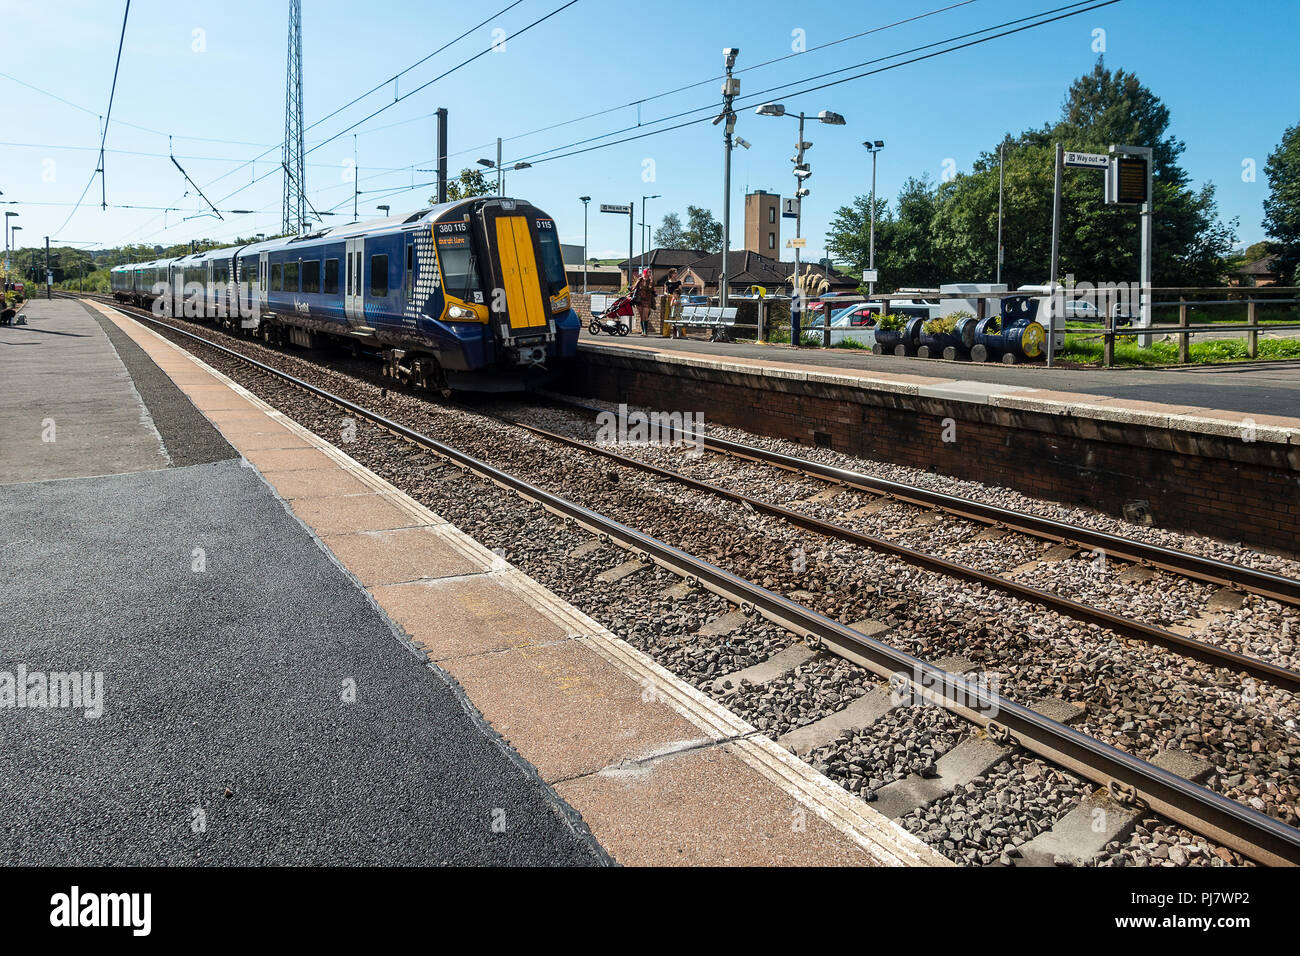 A Siemens Class 380 Desiro electric multiple-unit train (ScotRail run by Abellio) arriving at the halt in Dalry, North Ayrshire en route to Glasgow. Stock Photo